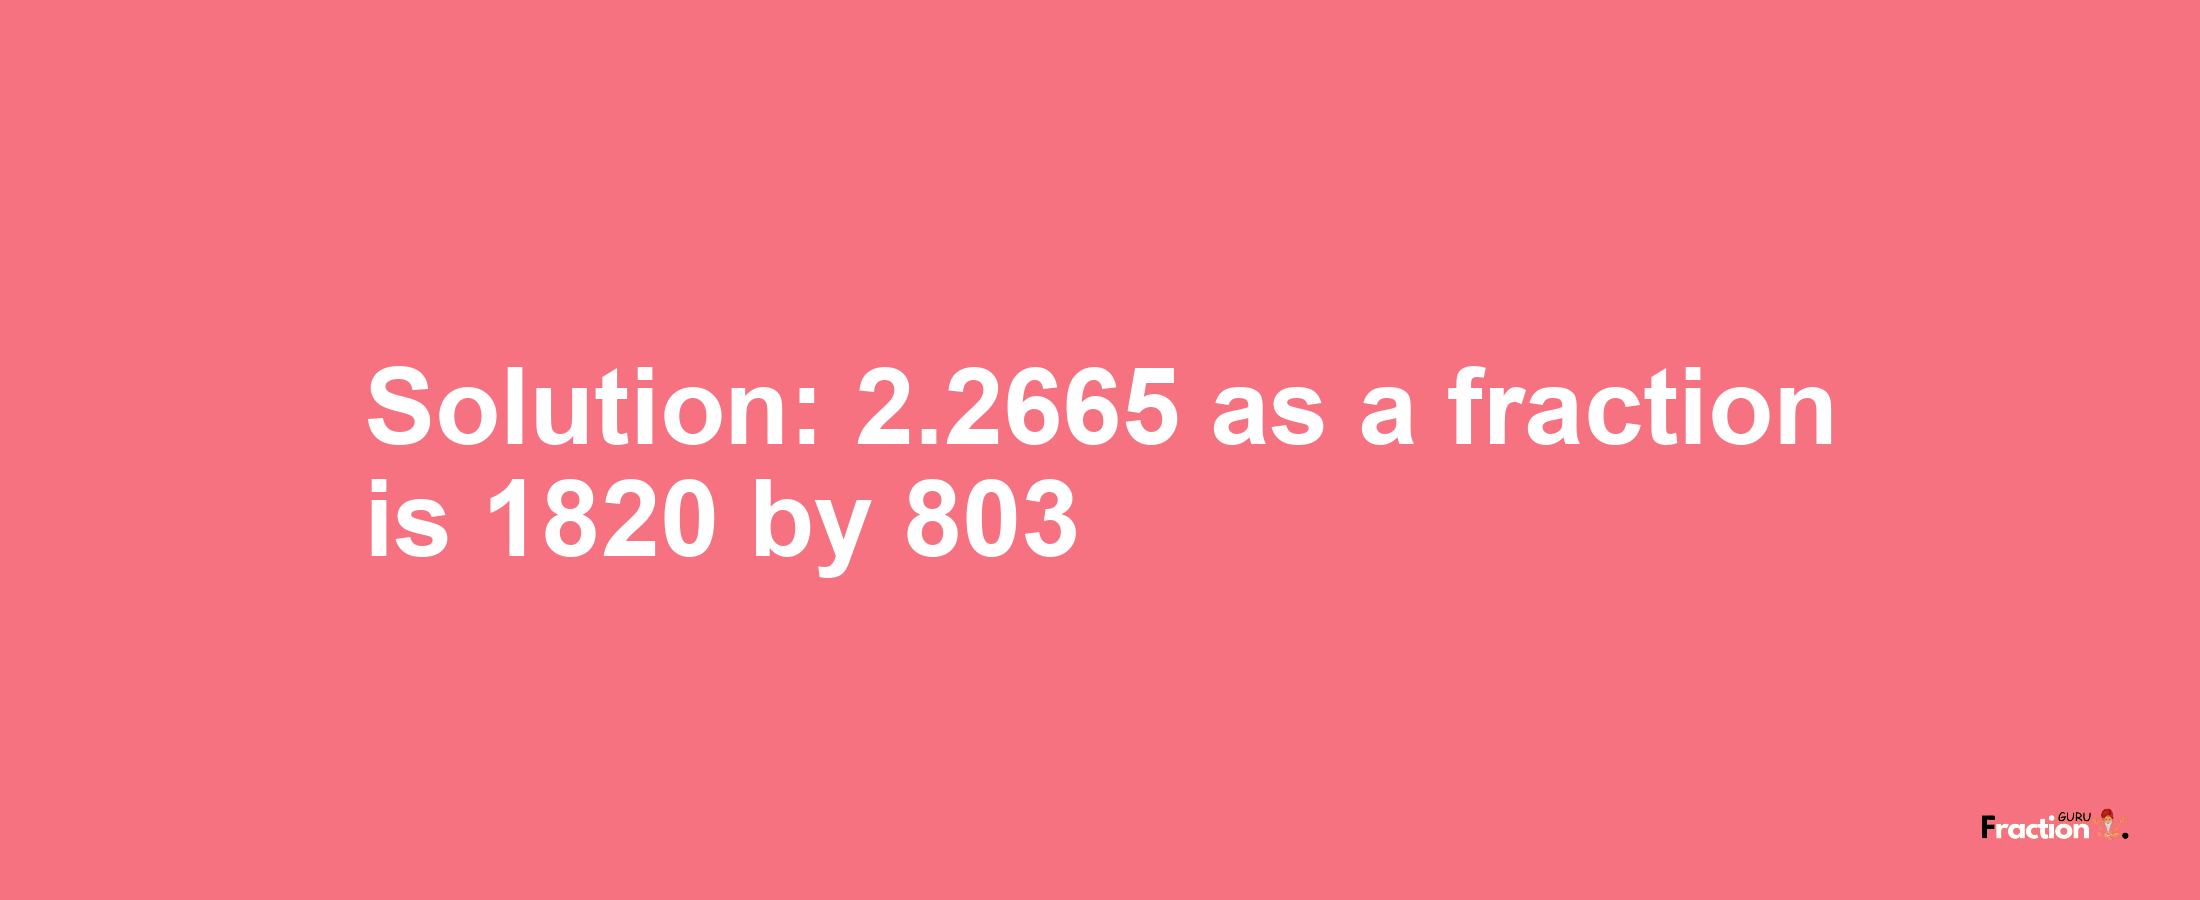 Solution:2.2665 as a fraction is 1820/803